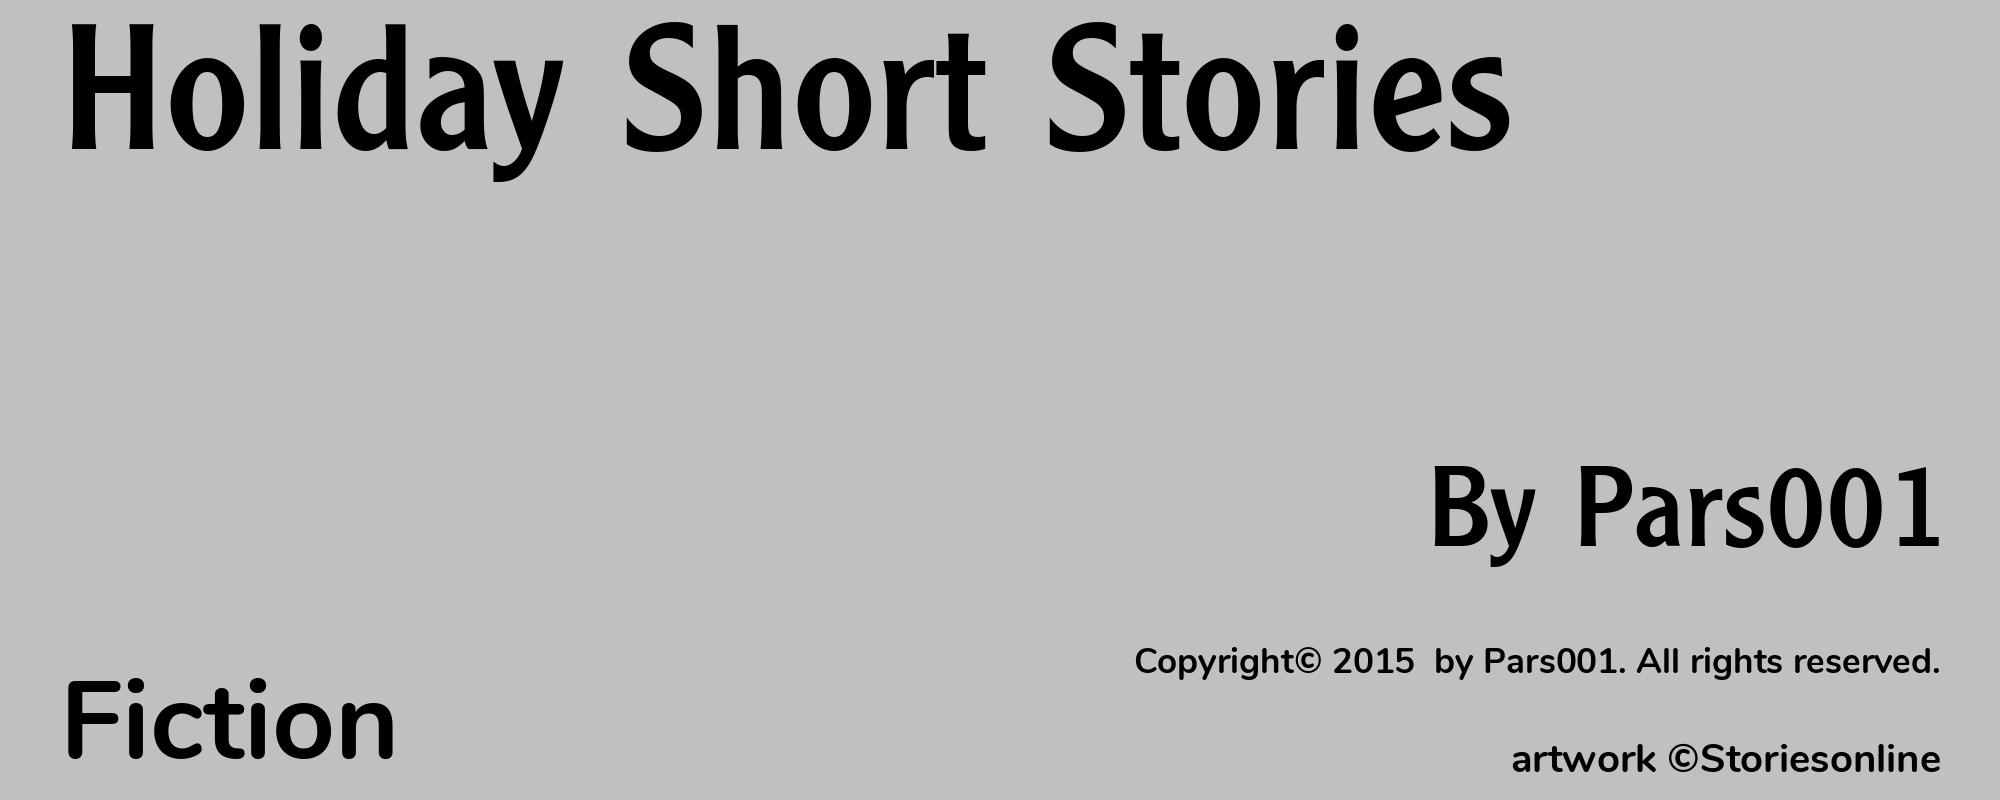 Holiday Short Stories - Cover